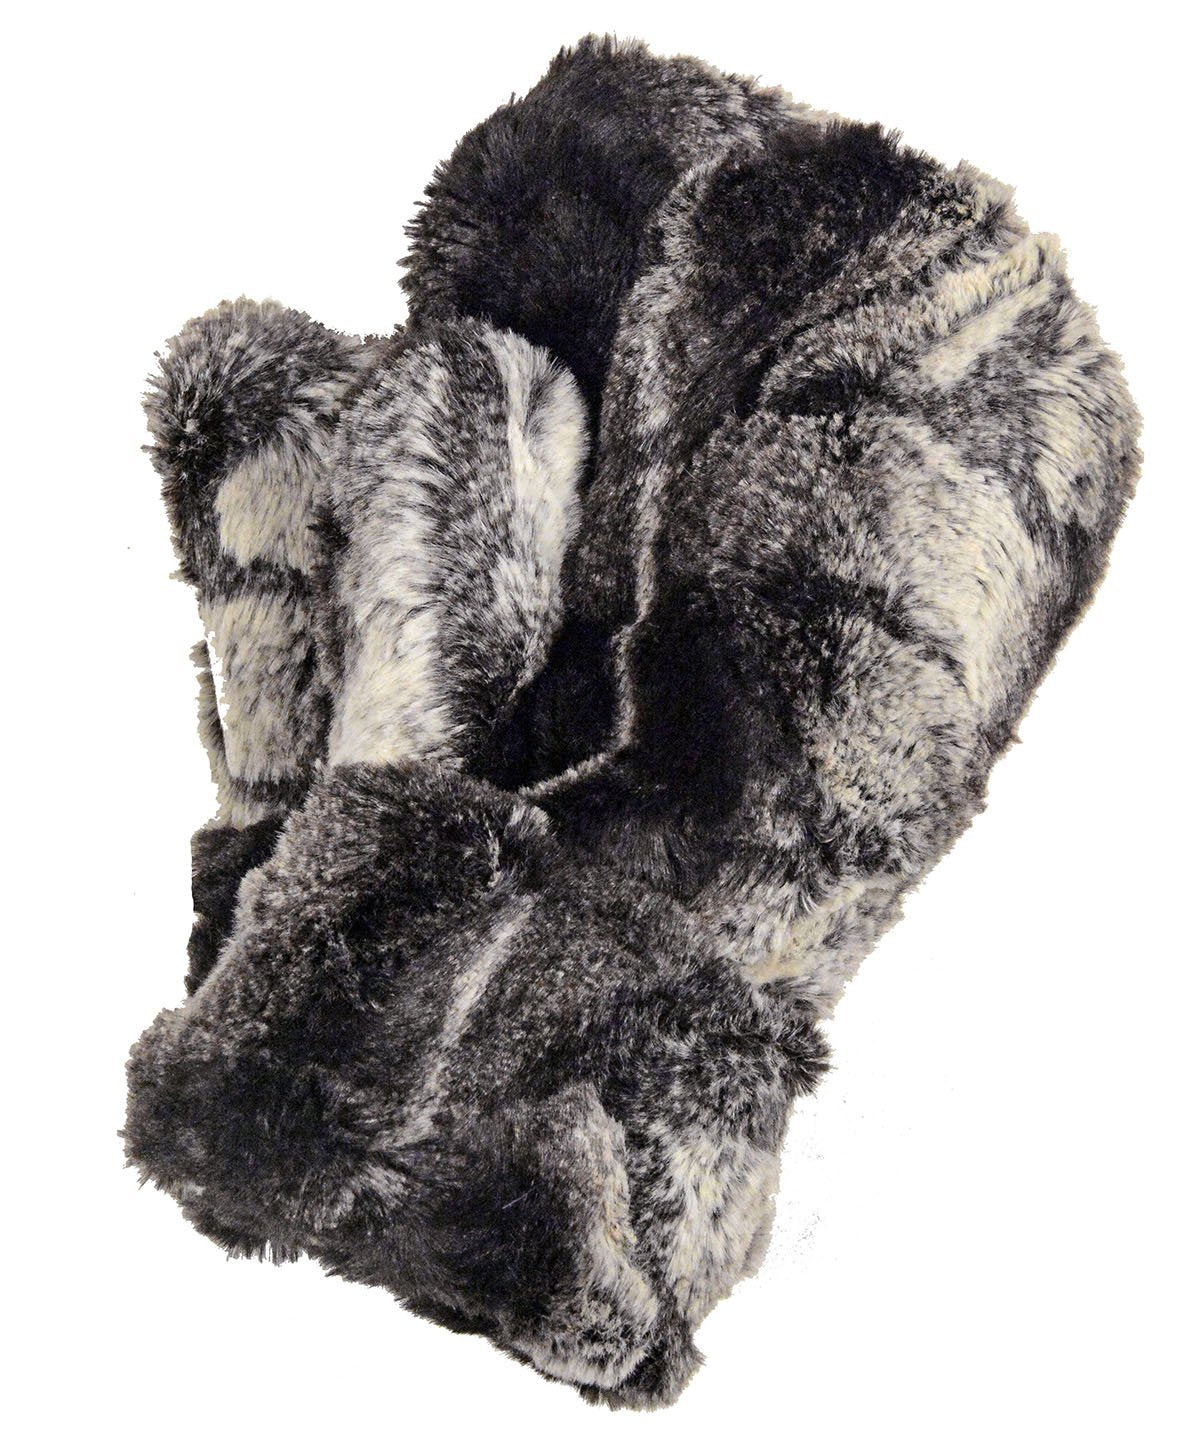 Mittens - Luxury Faux Fur in Honey Badger (SOLD OUT)